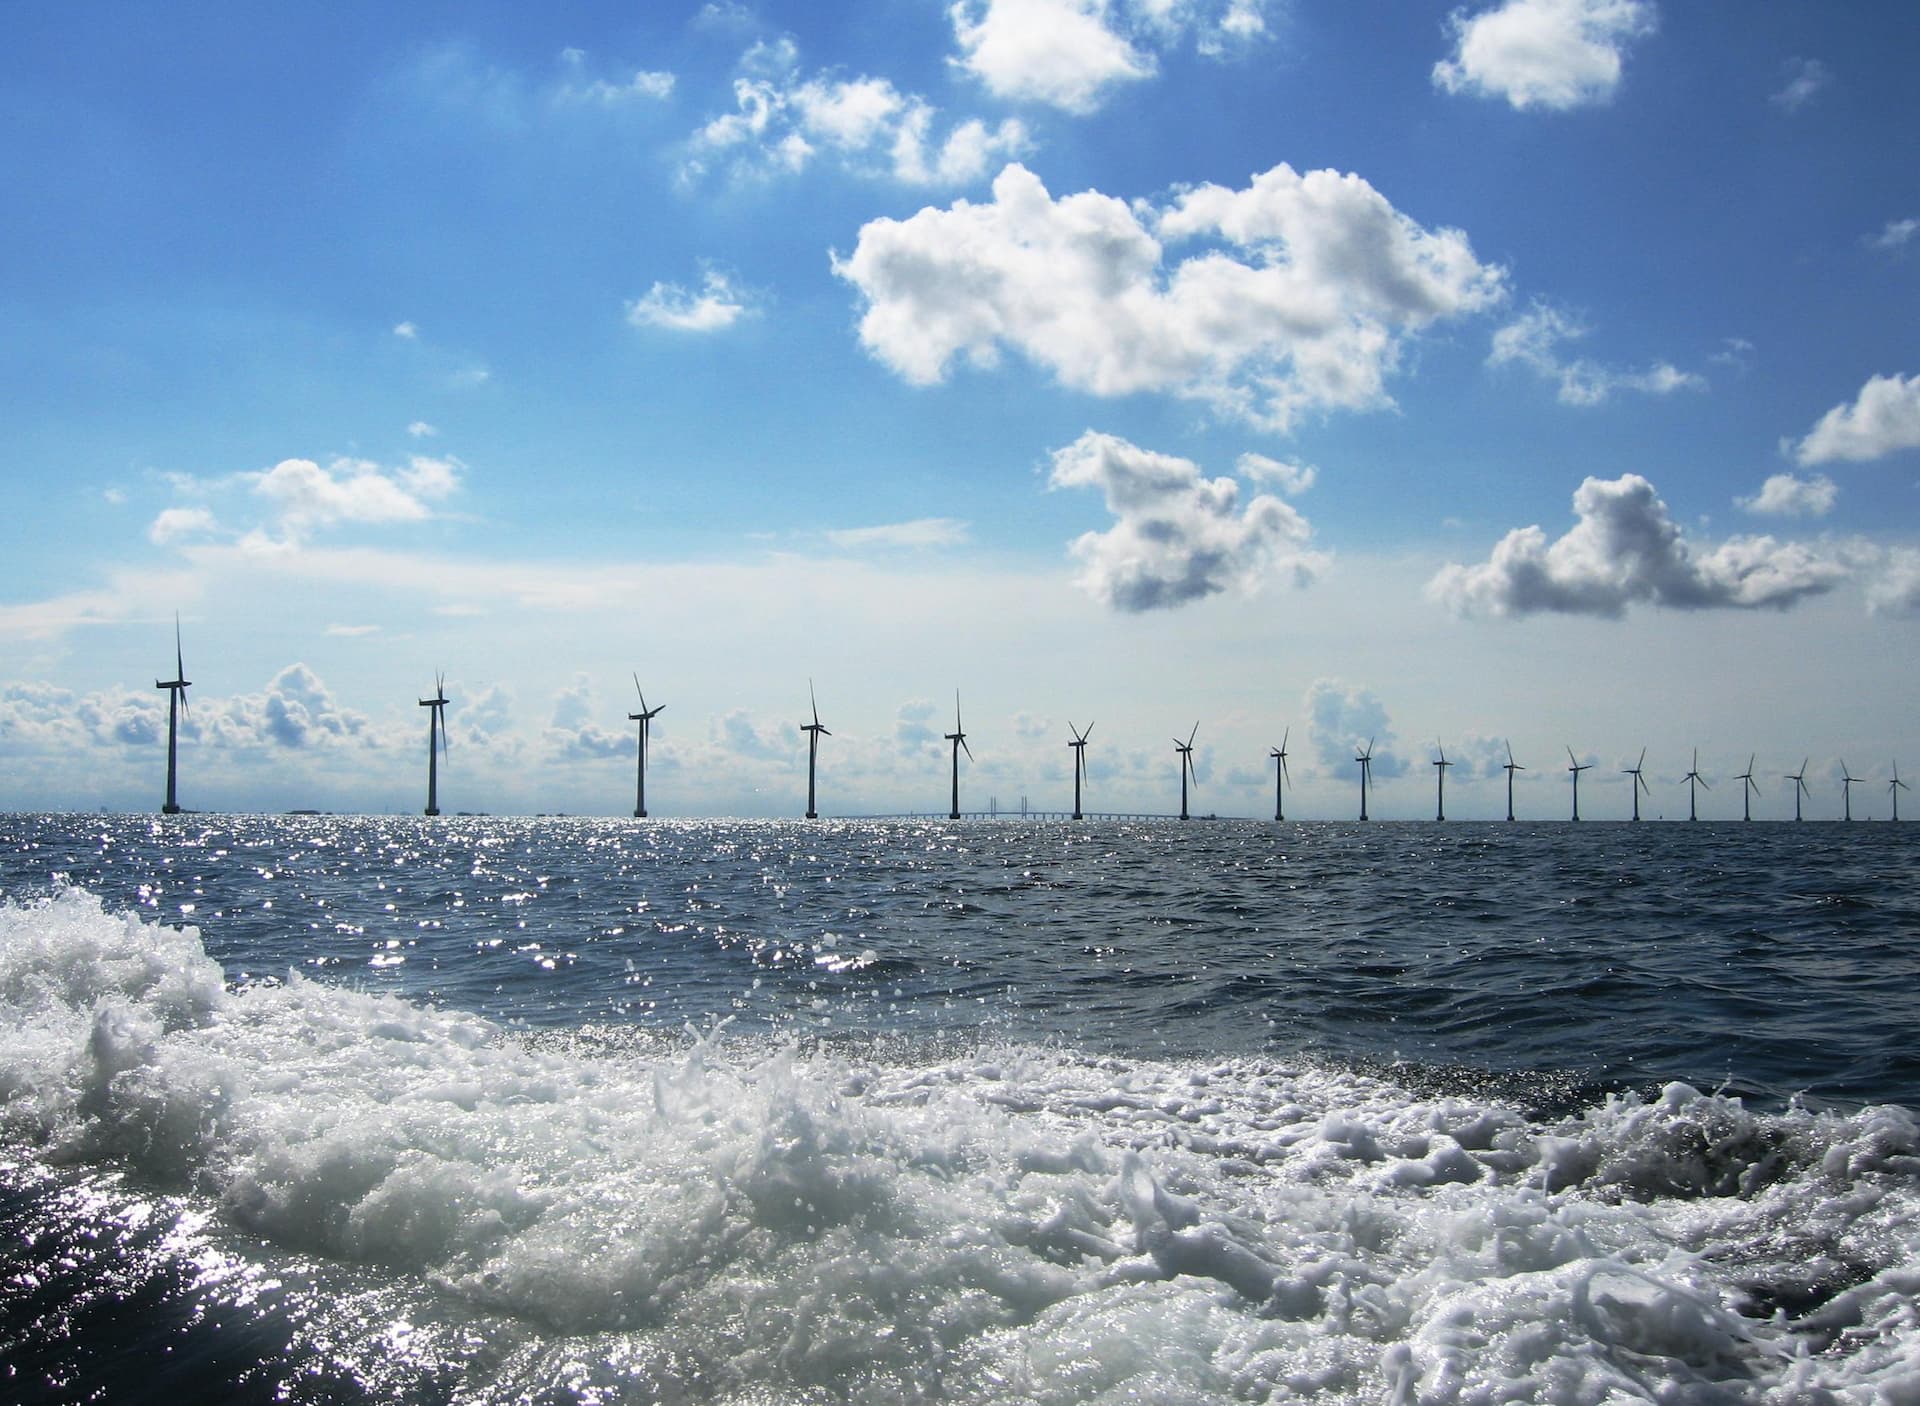 While wind is a renewable energy source, the materials used to produce the turbines are finite. 